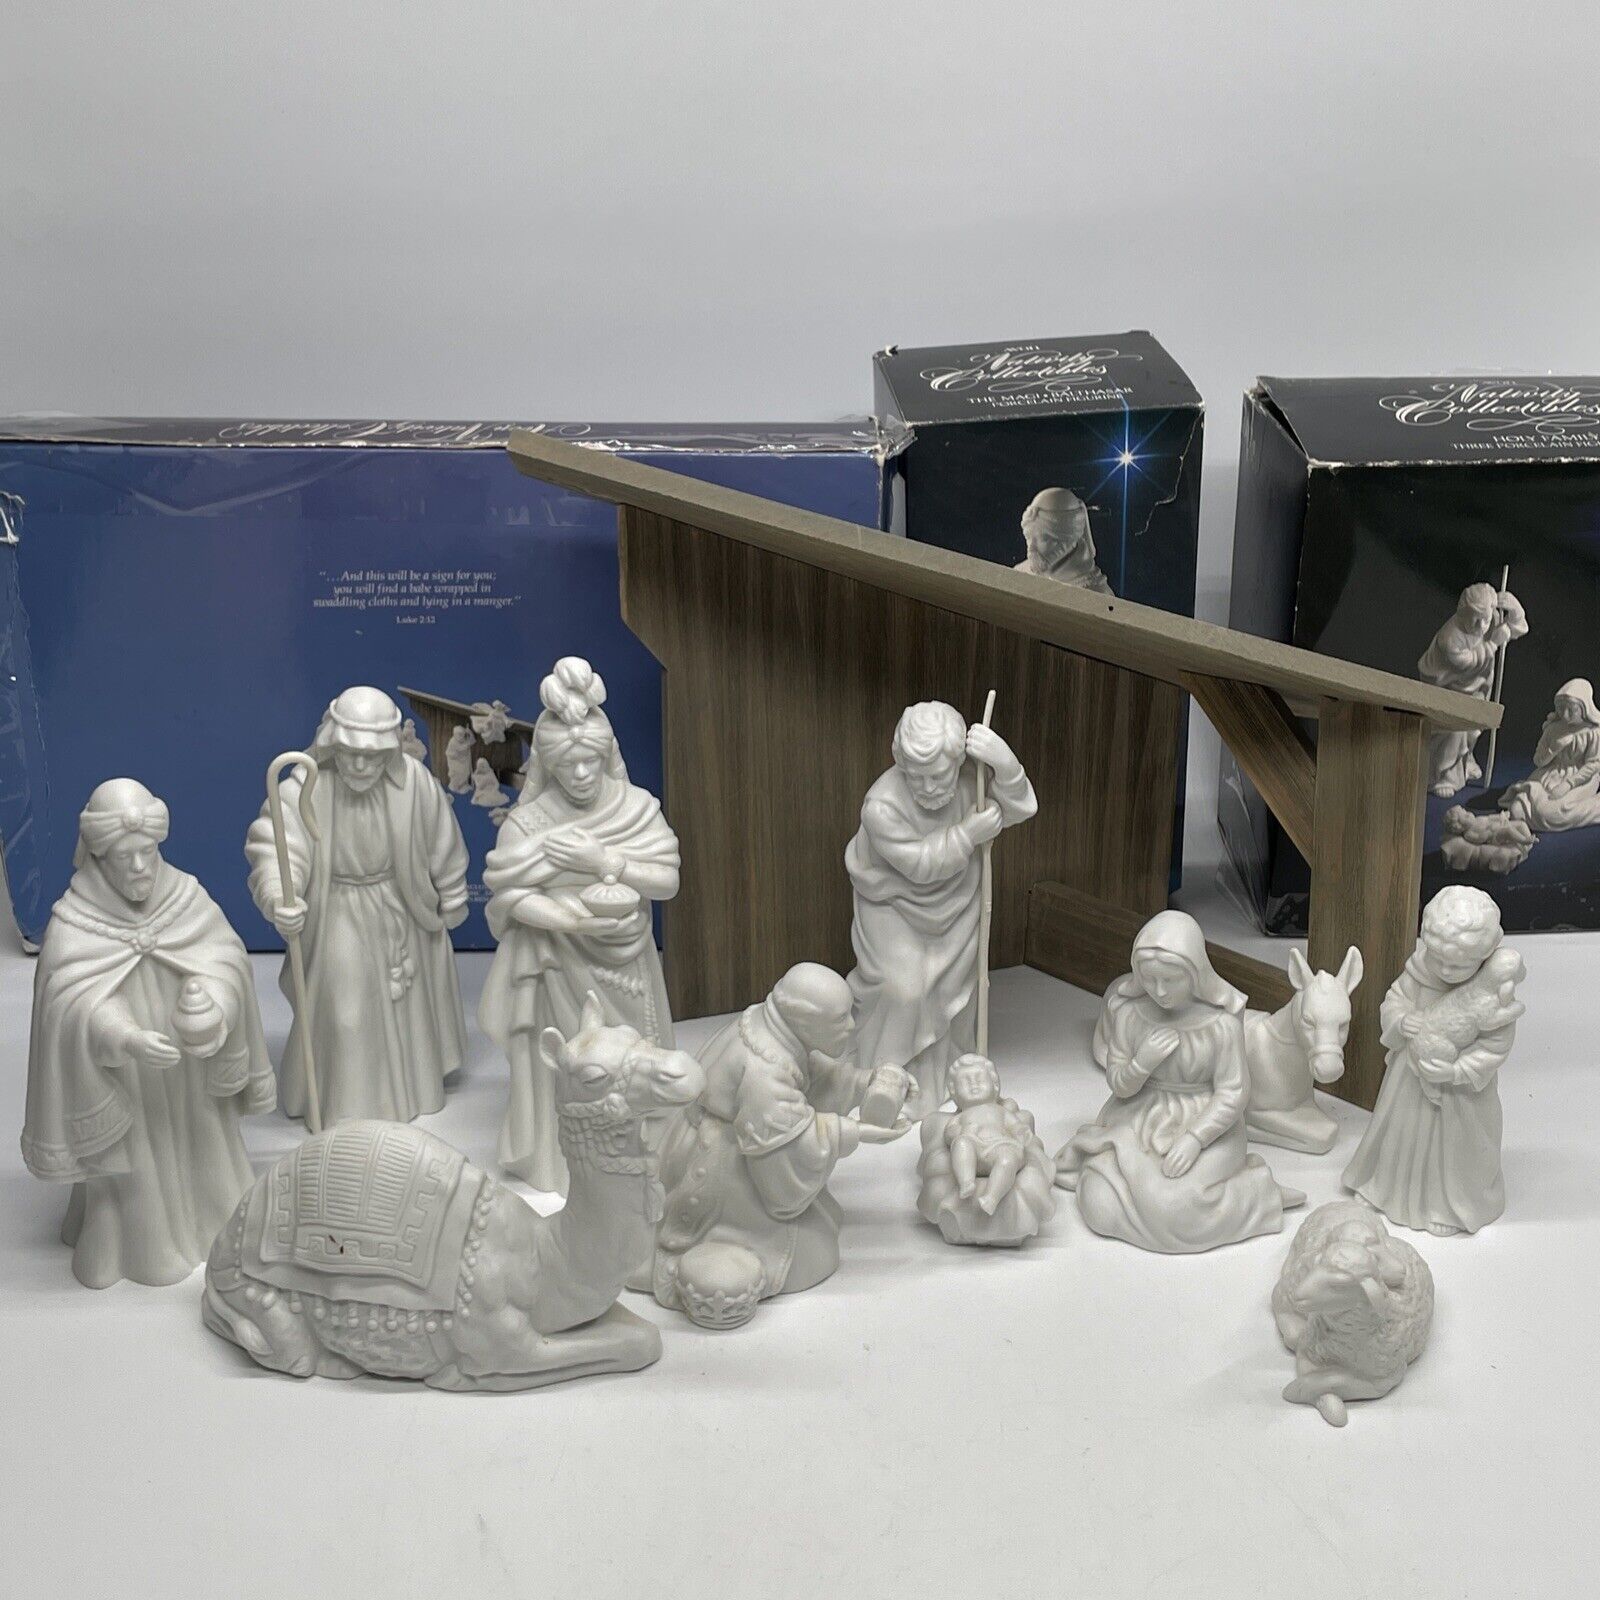 Vintage Lot of 12 Pieces of Avon White Porcelain Nativity Set in Boxes & Stable